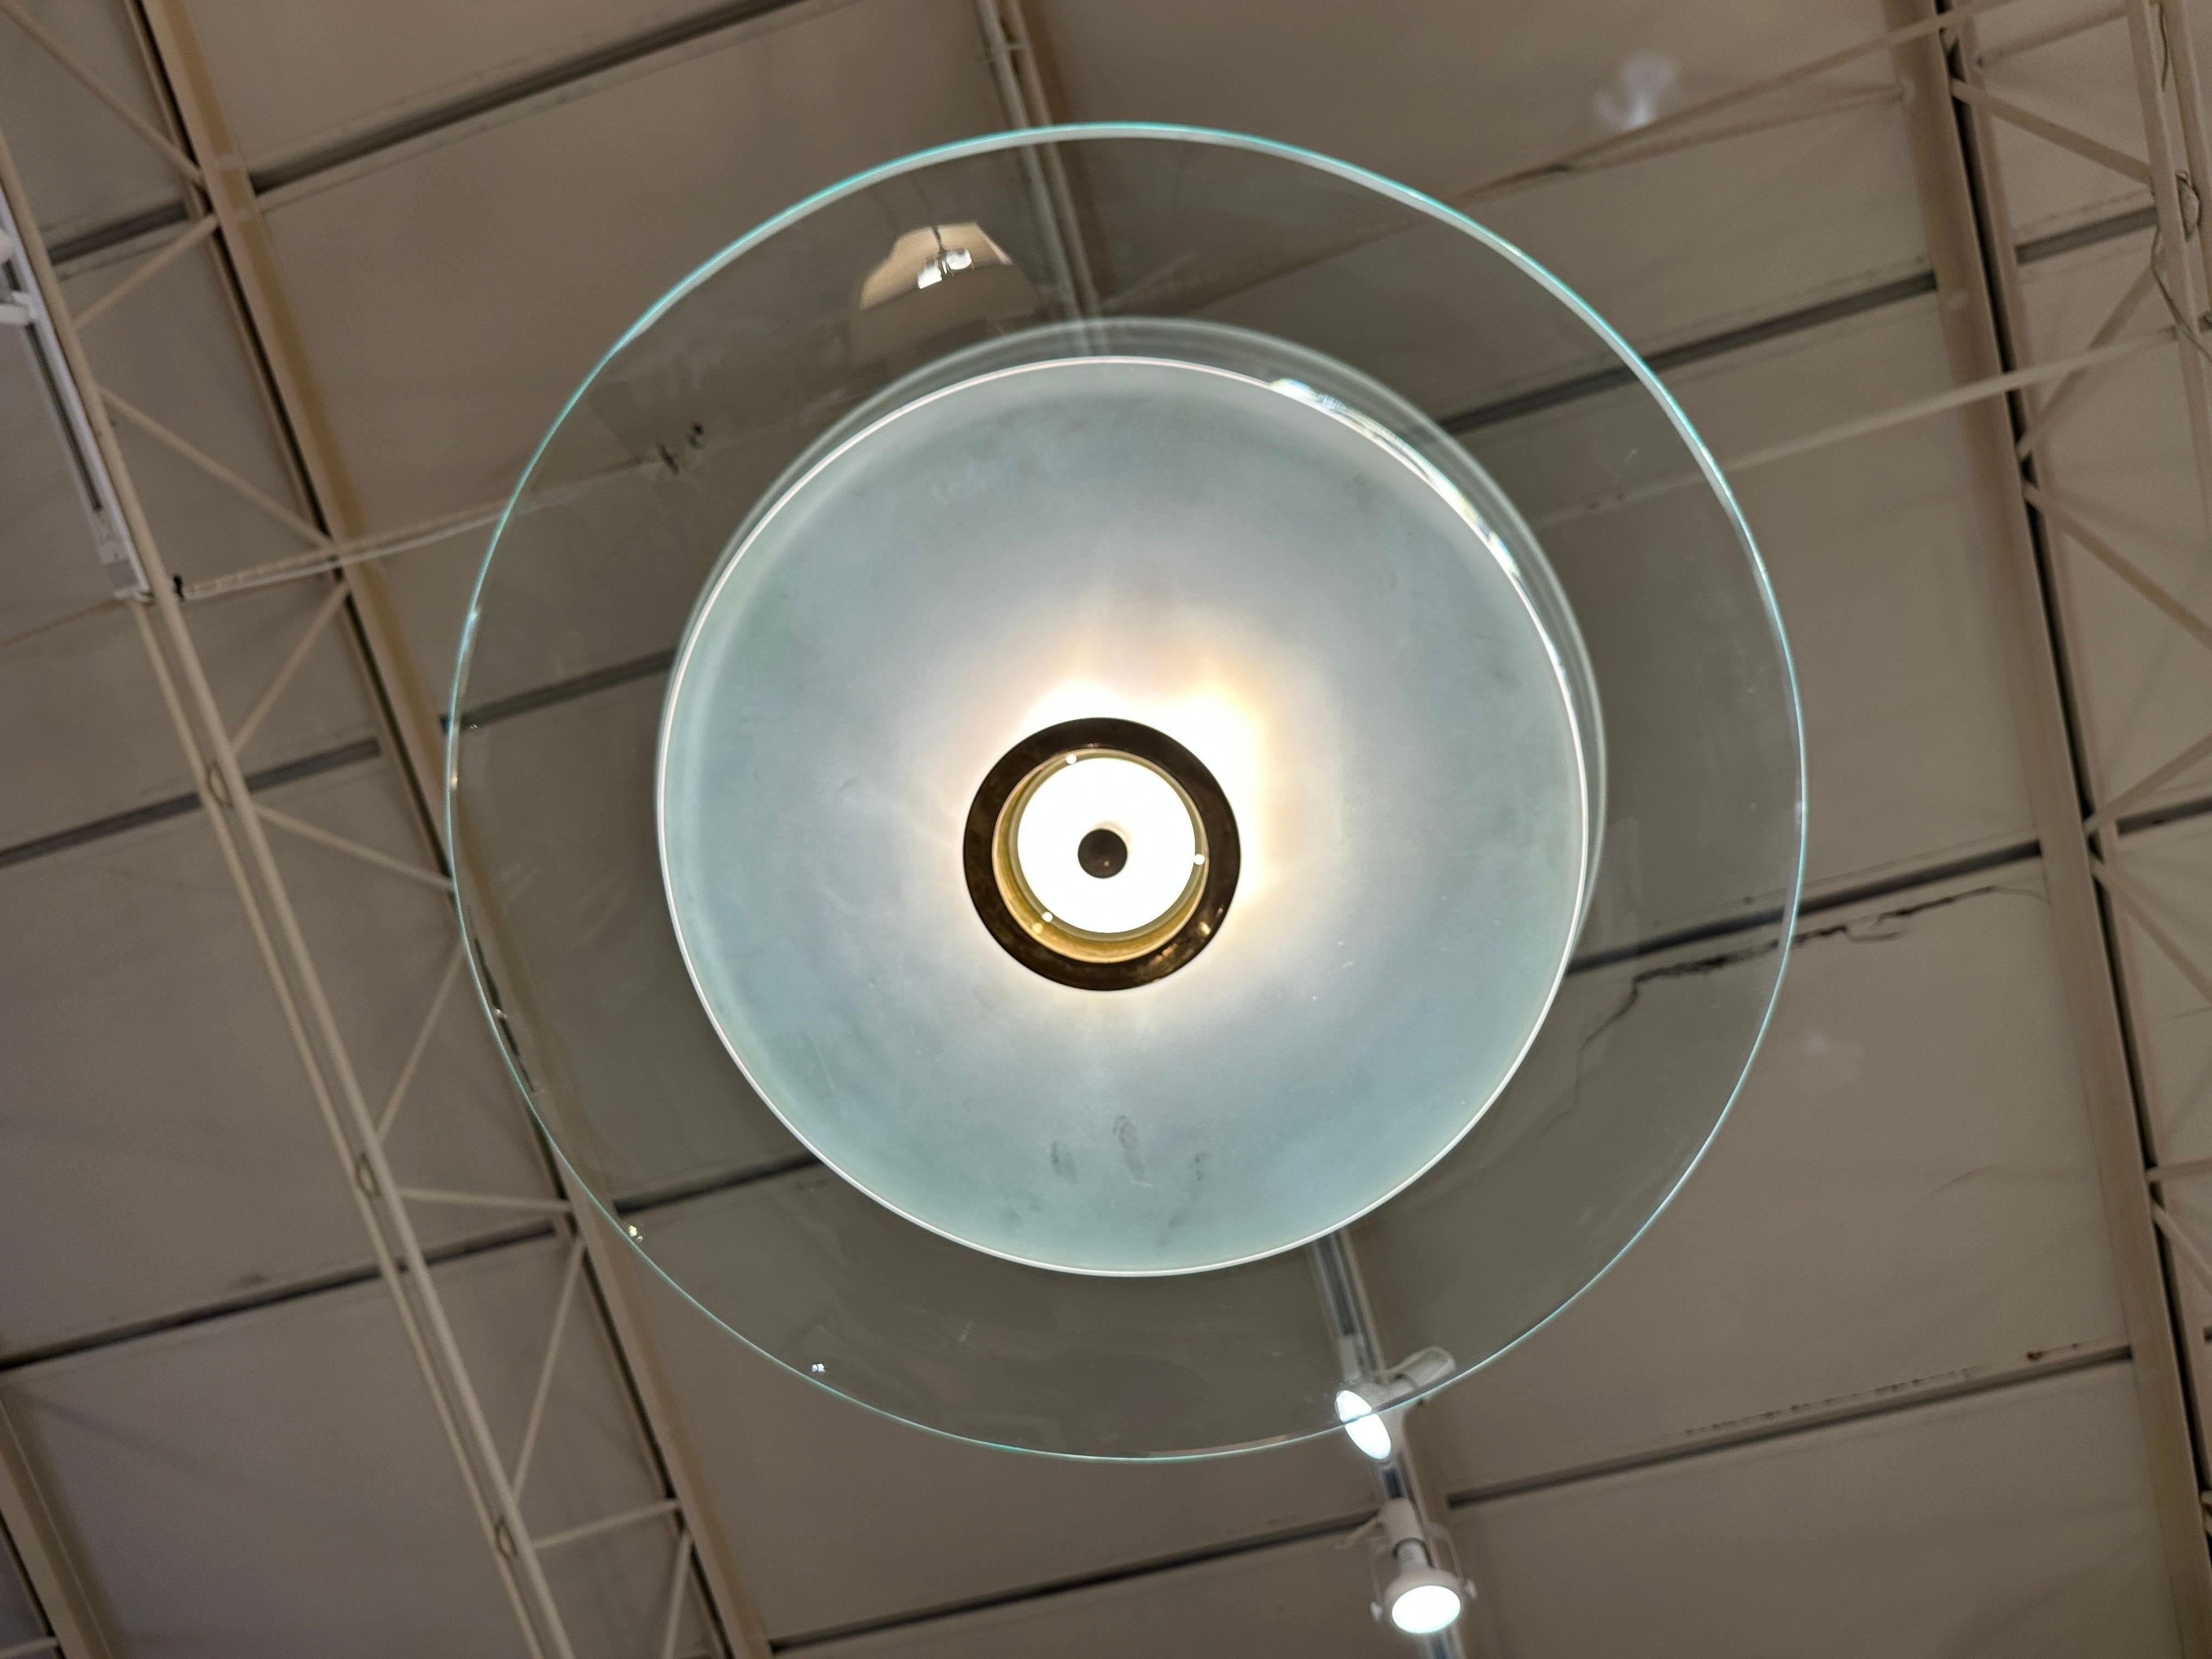 This large 35 inch diameter glass ceiling mounted chandelier # 1508 by Max Ingrand for Fontana Arte is very RARE and ALL original vintage. Wonderful patina to brass ring diffuser - lower bowl is frosted and the top dome is clear glass in the